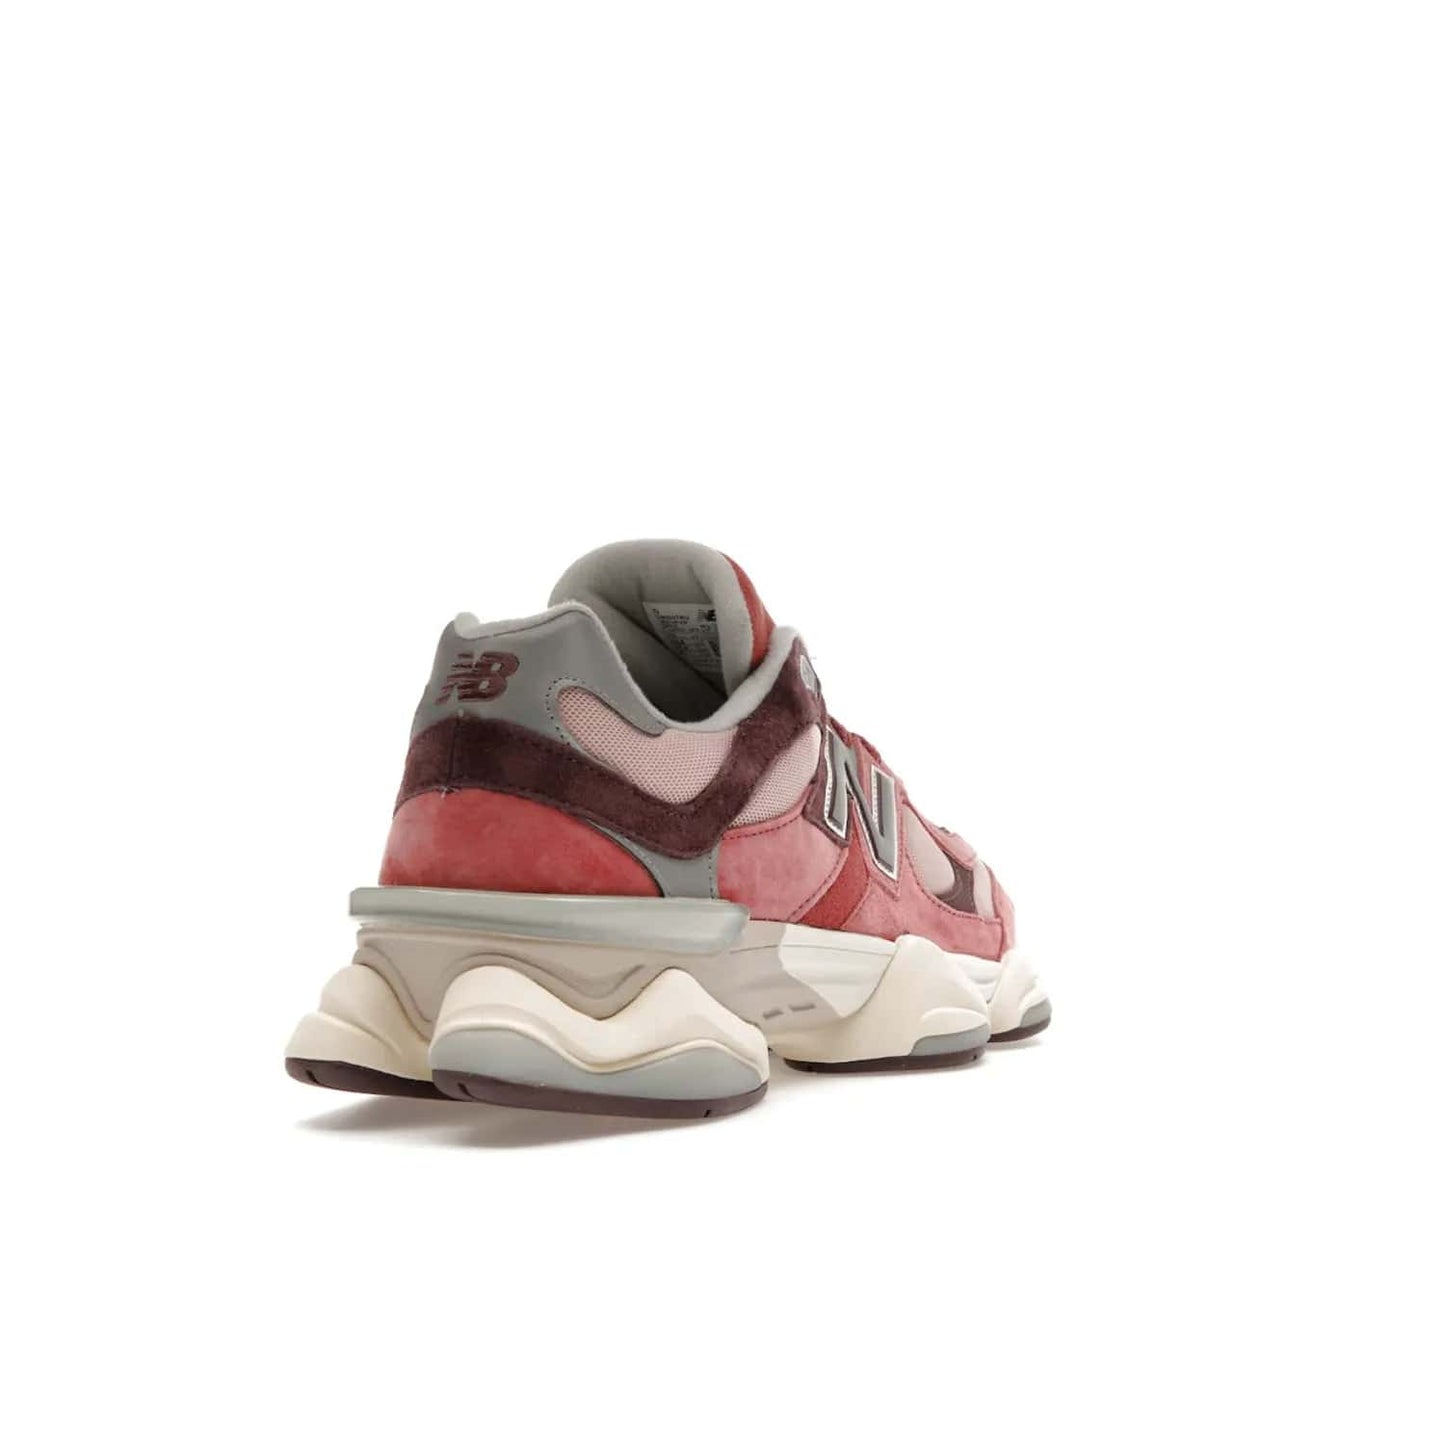 New Balance 9060 Cherry Blossom - Image 31 - Only at www.BallersClubKickz.com - The New Balance 9060 Cherry Blossom: Mineral Red, Truffle, and Rain Cloud tones with silver-tone N symbols, semi-transparent CR equipment, and more. Celebrate the cherry blossom festival in style - released March 4th, 2023.